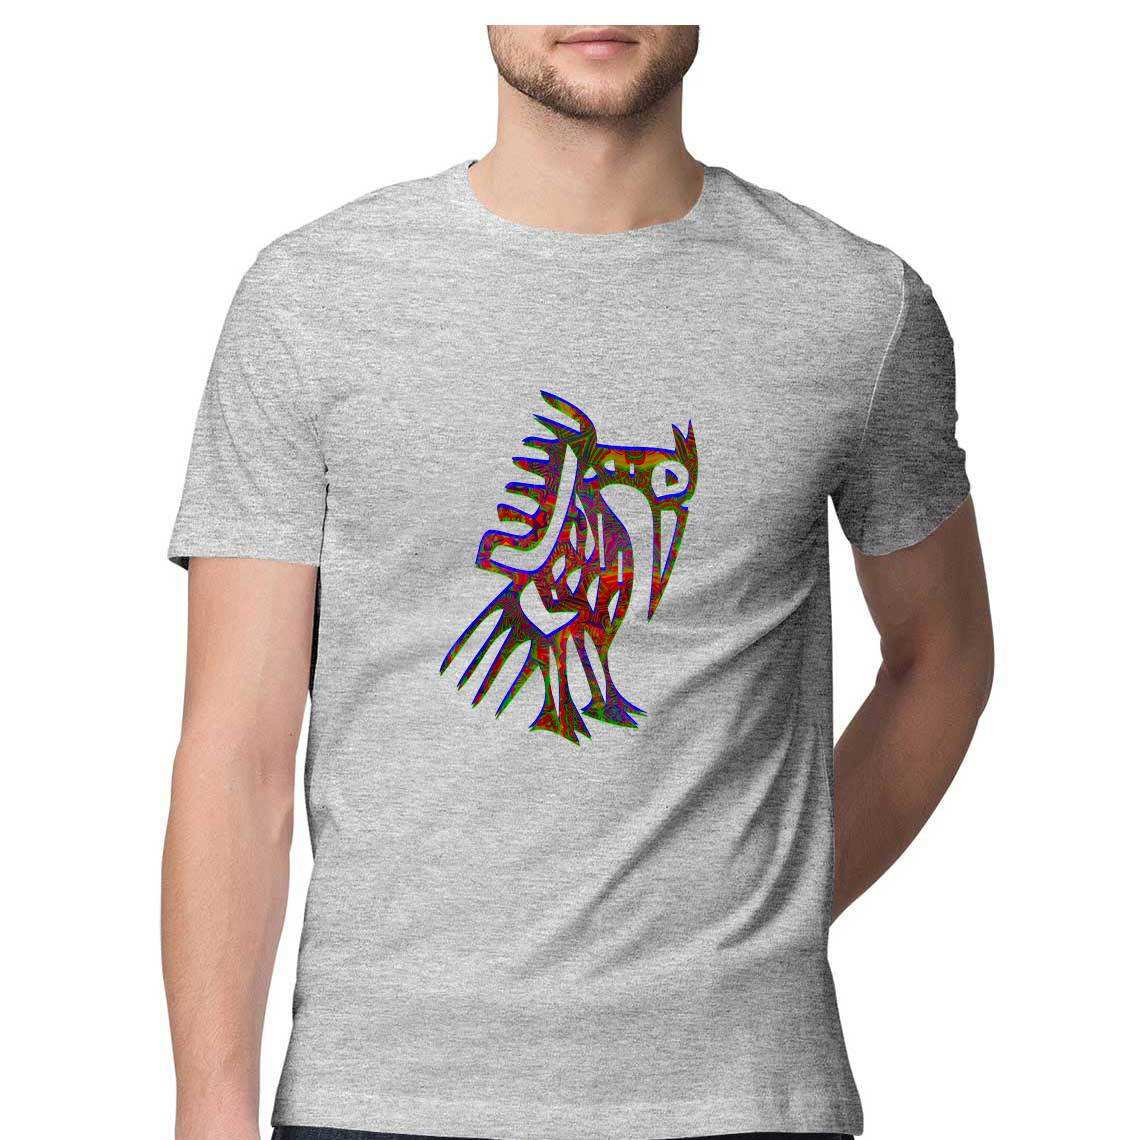 The Woodpecker of the Incan Forest Men's T-Shirt - CBD Store India